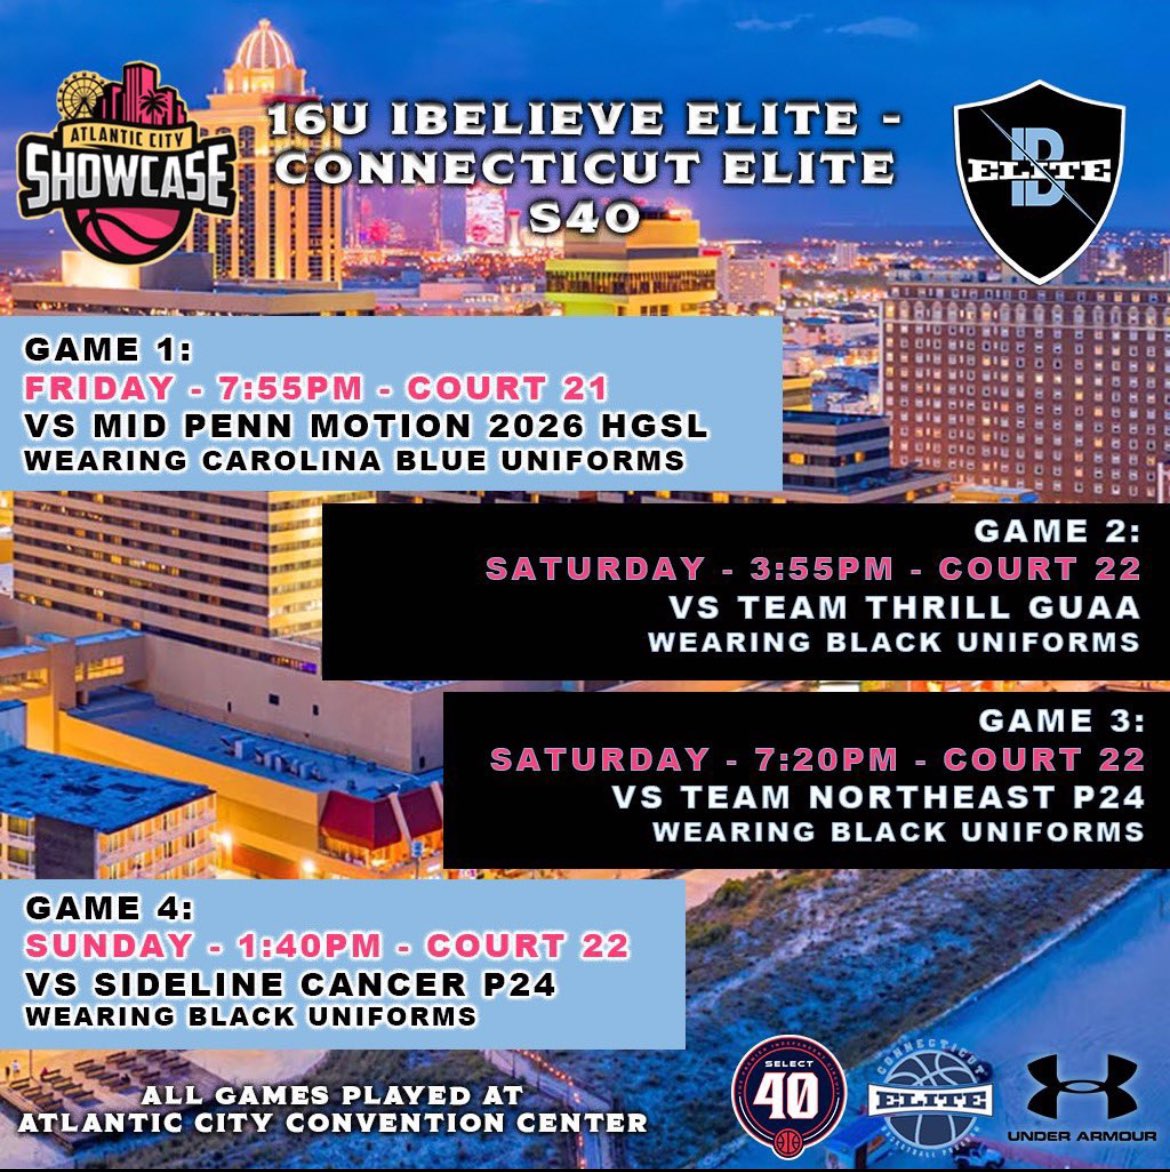 Here’s my schedule for the live period in Atlantic City! Can’t wait. @ibelieve_elite